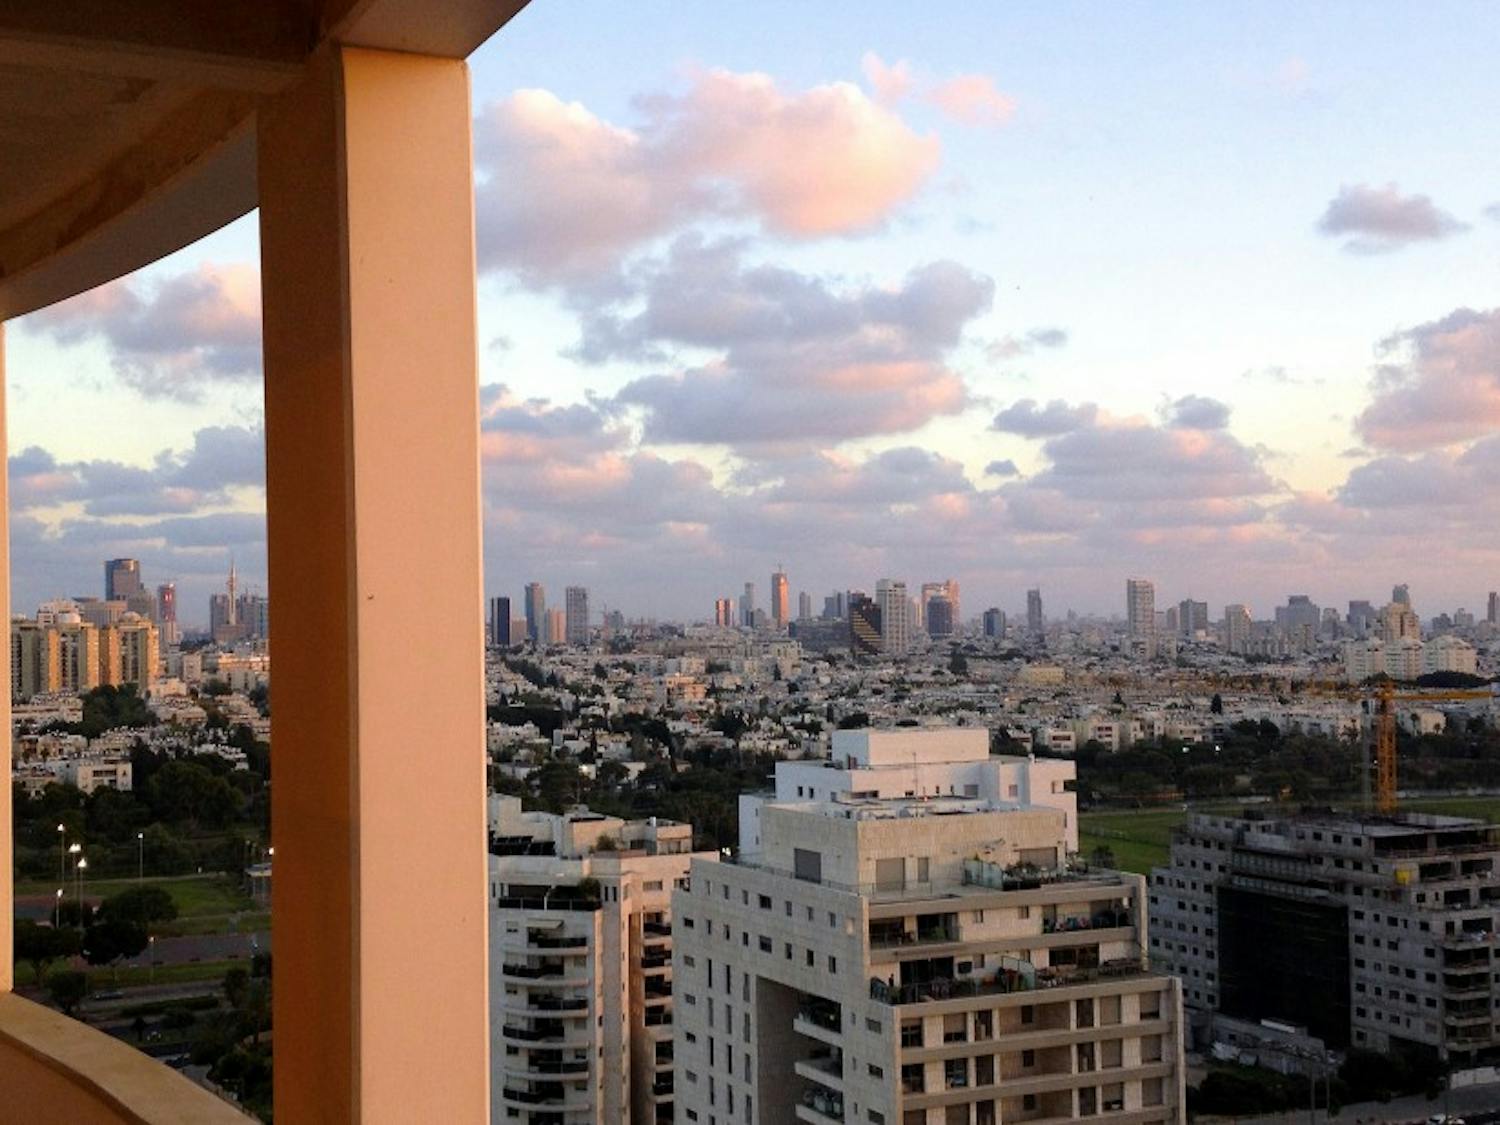 Living in the city of Tel Aviv for 10 weeks, senior Elissa Levine had a front row seat for this summer's turmoil between Israel and Palestine.